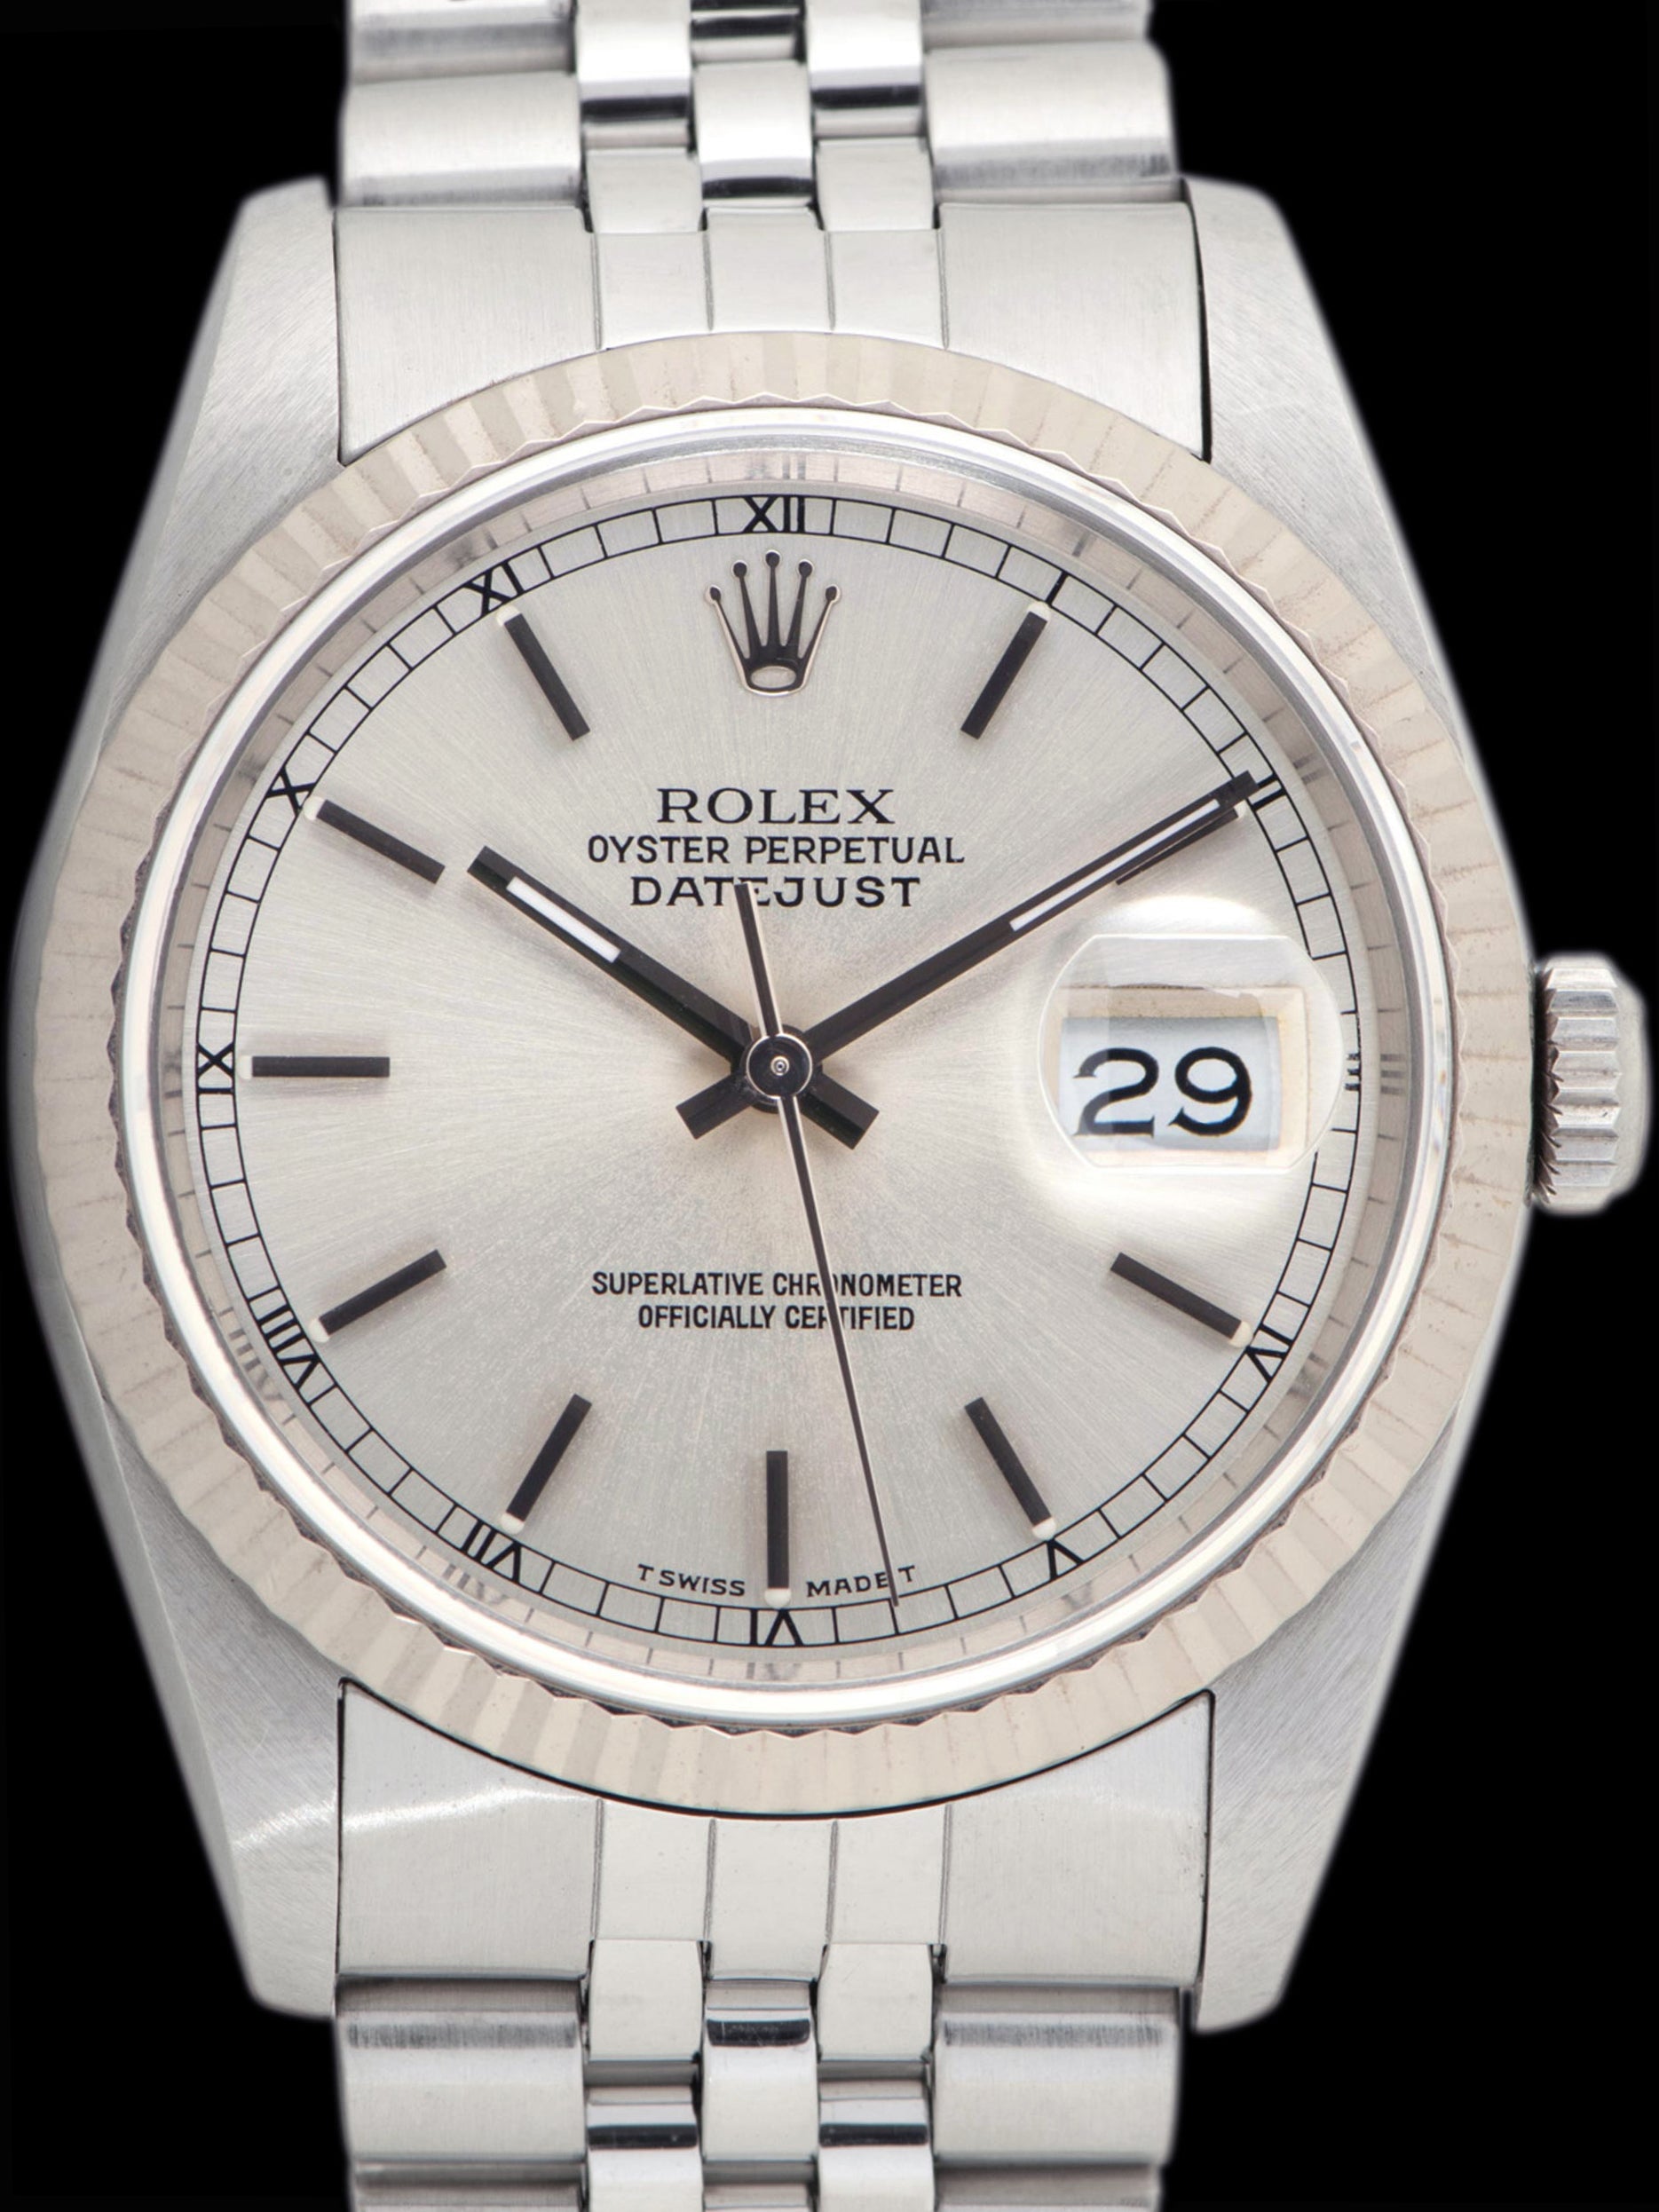 *Unpolished* 1989 Rolex Datejust (Ref. 16234) Silver Dial